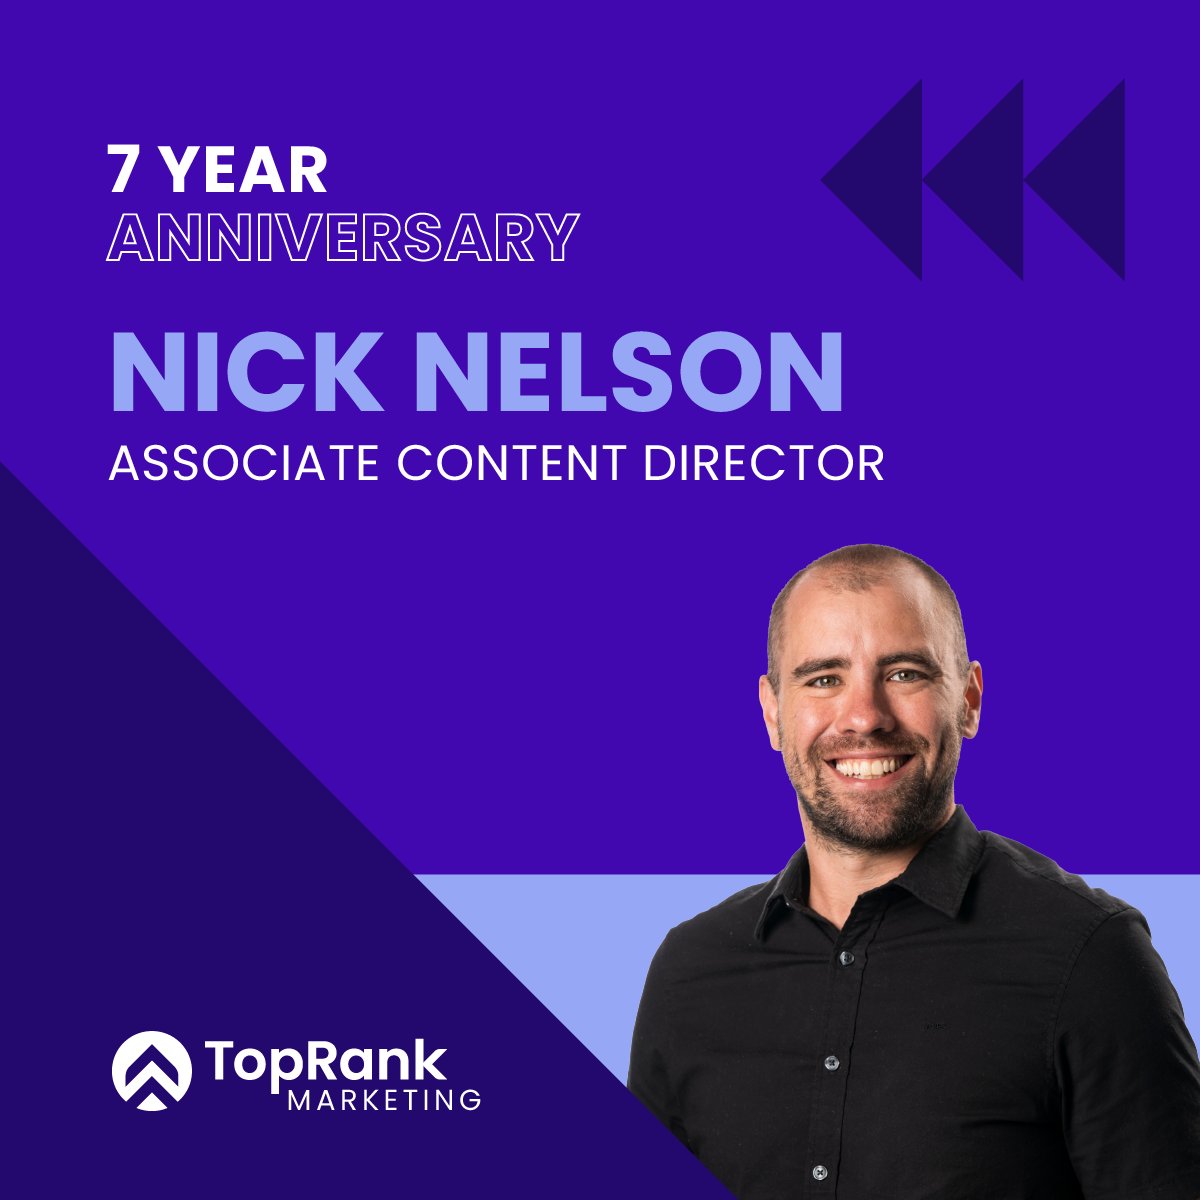 Cheers to 7 years of creativity, collaboration, and storytelling with our Associate Content Director, @NickNelsonMN! 🎉✨ 

Thanks for all you do, Nick! 

#WorkAnniversary #B2BMarketing #Milestones